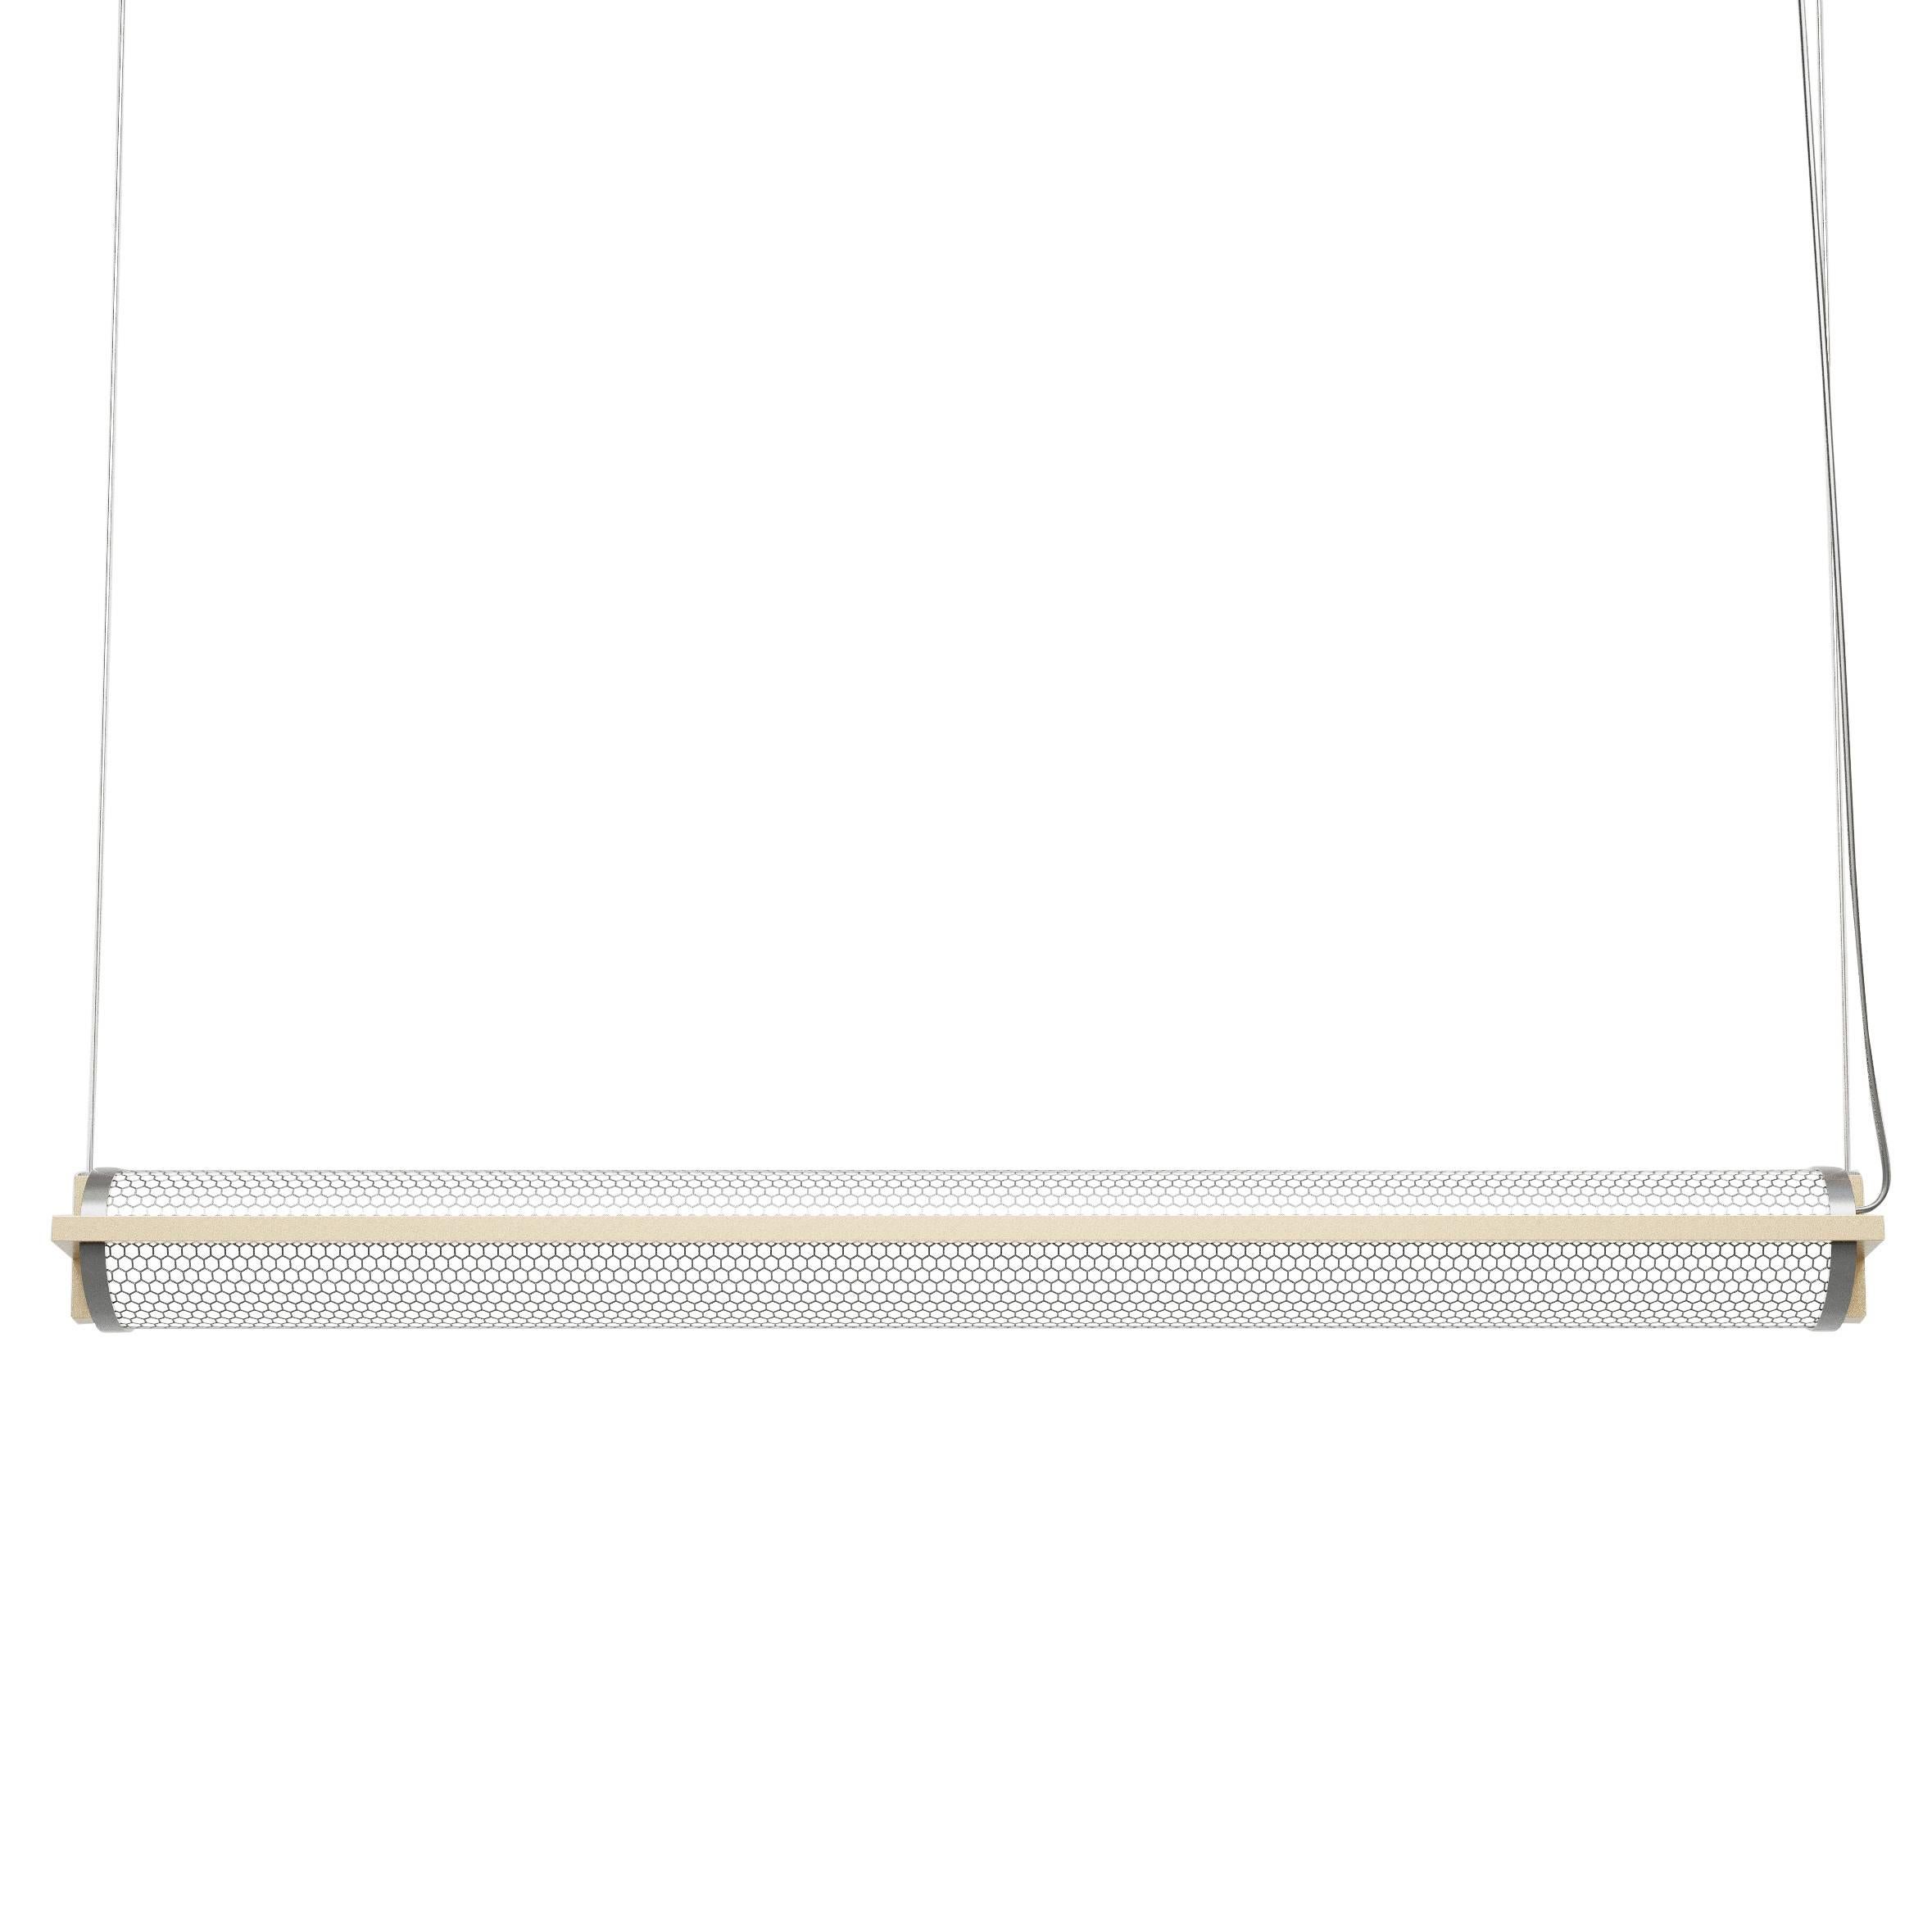 Metropolis Contemporary Modular Suspended LED Light Fixture in 36" Length For Sale